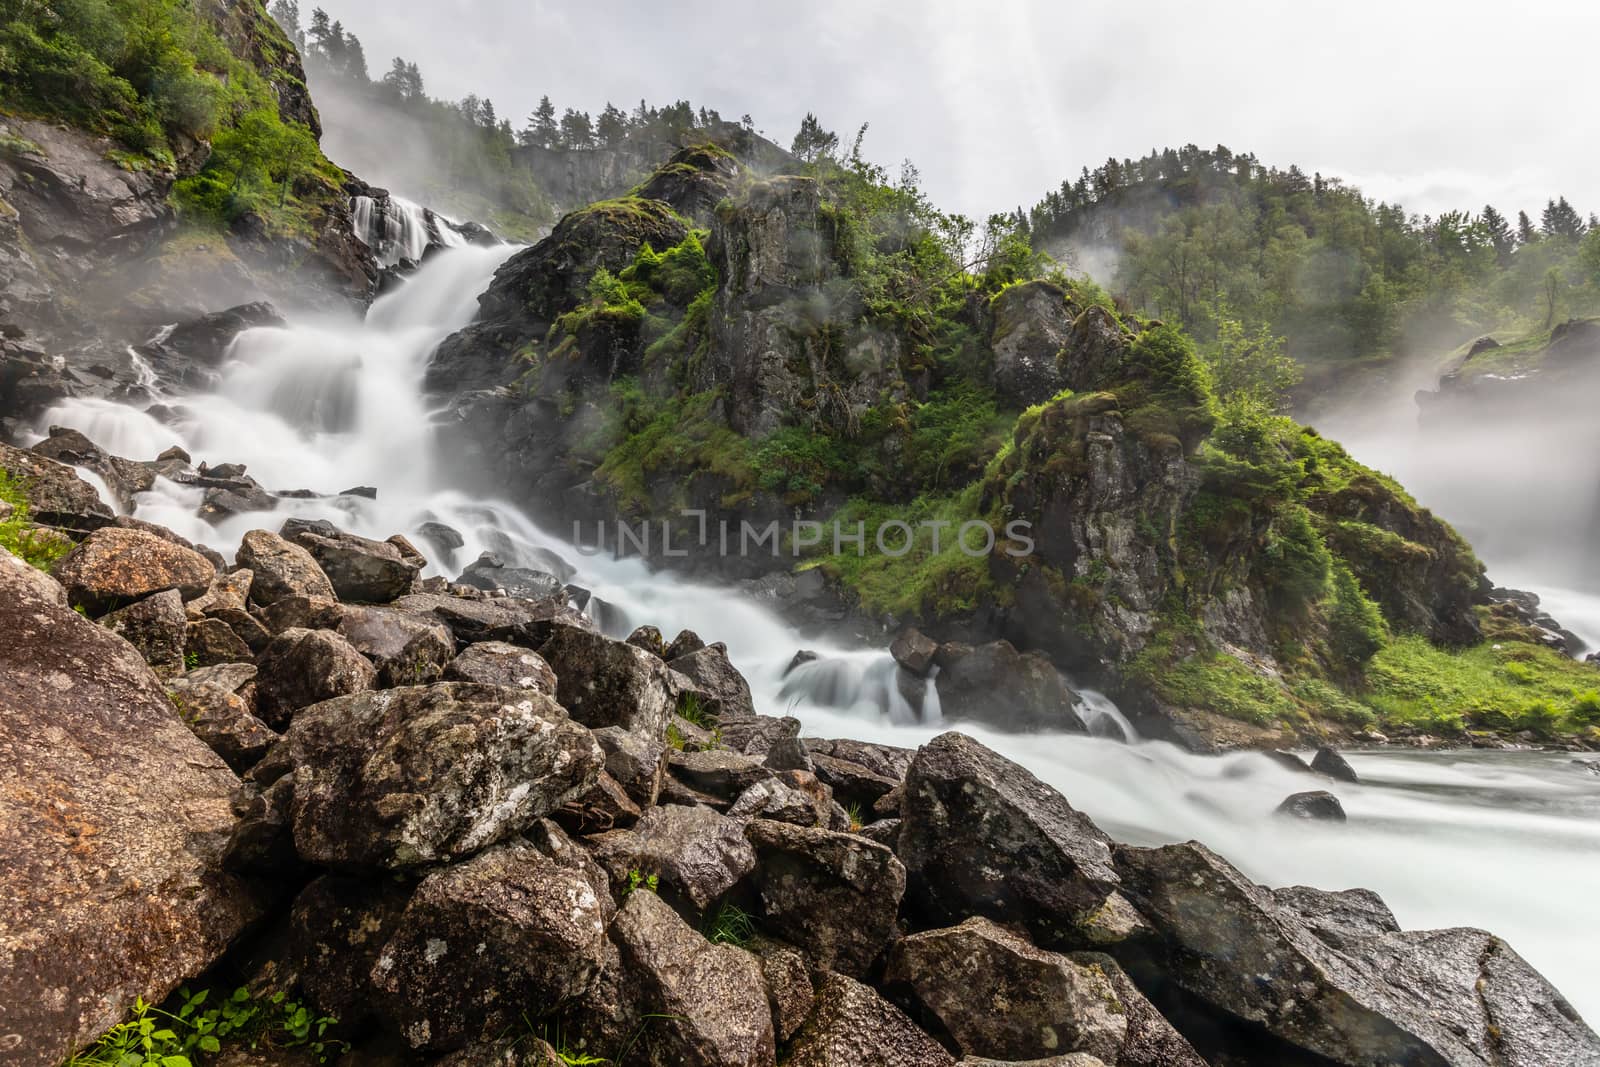 Latefoss waterfalls streams with stones in the foreground, Odda, by ambeon